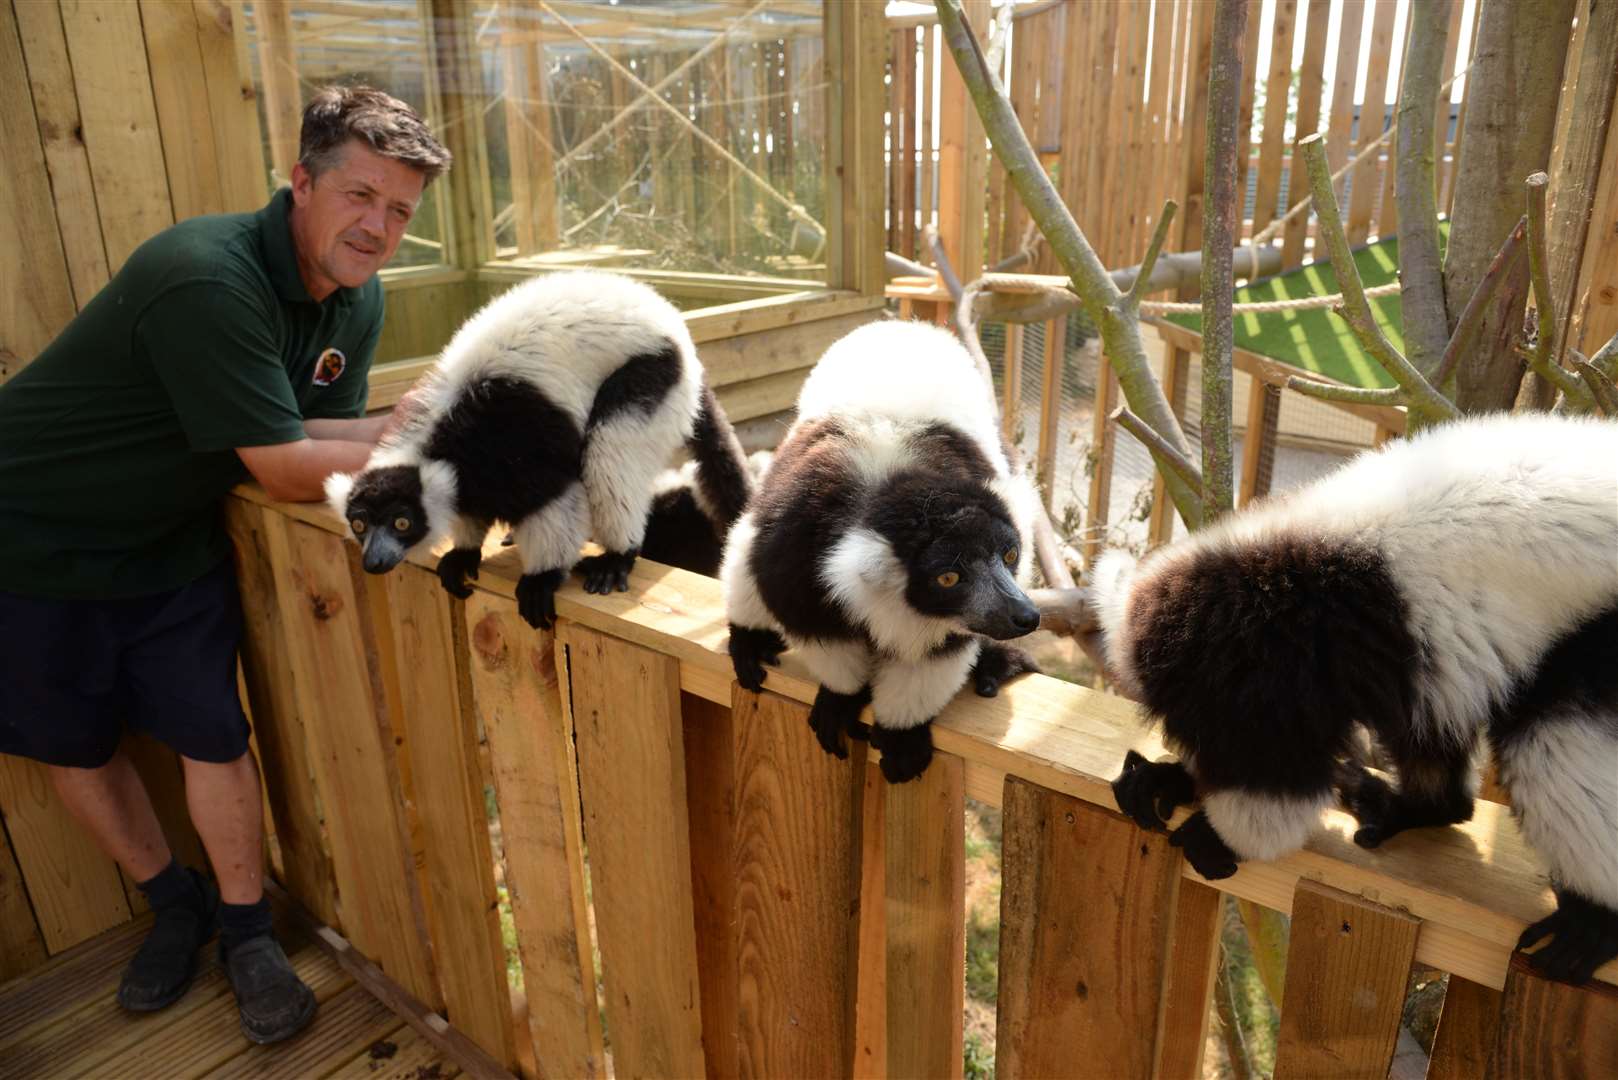 The Fenn Bell Inn has a zoo in the back yard, home to lemurs, parrots and the like